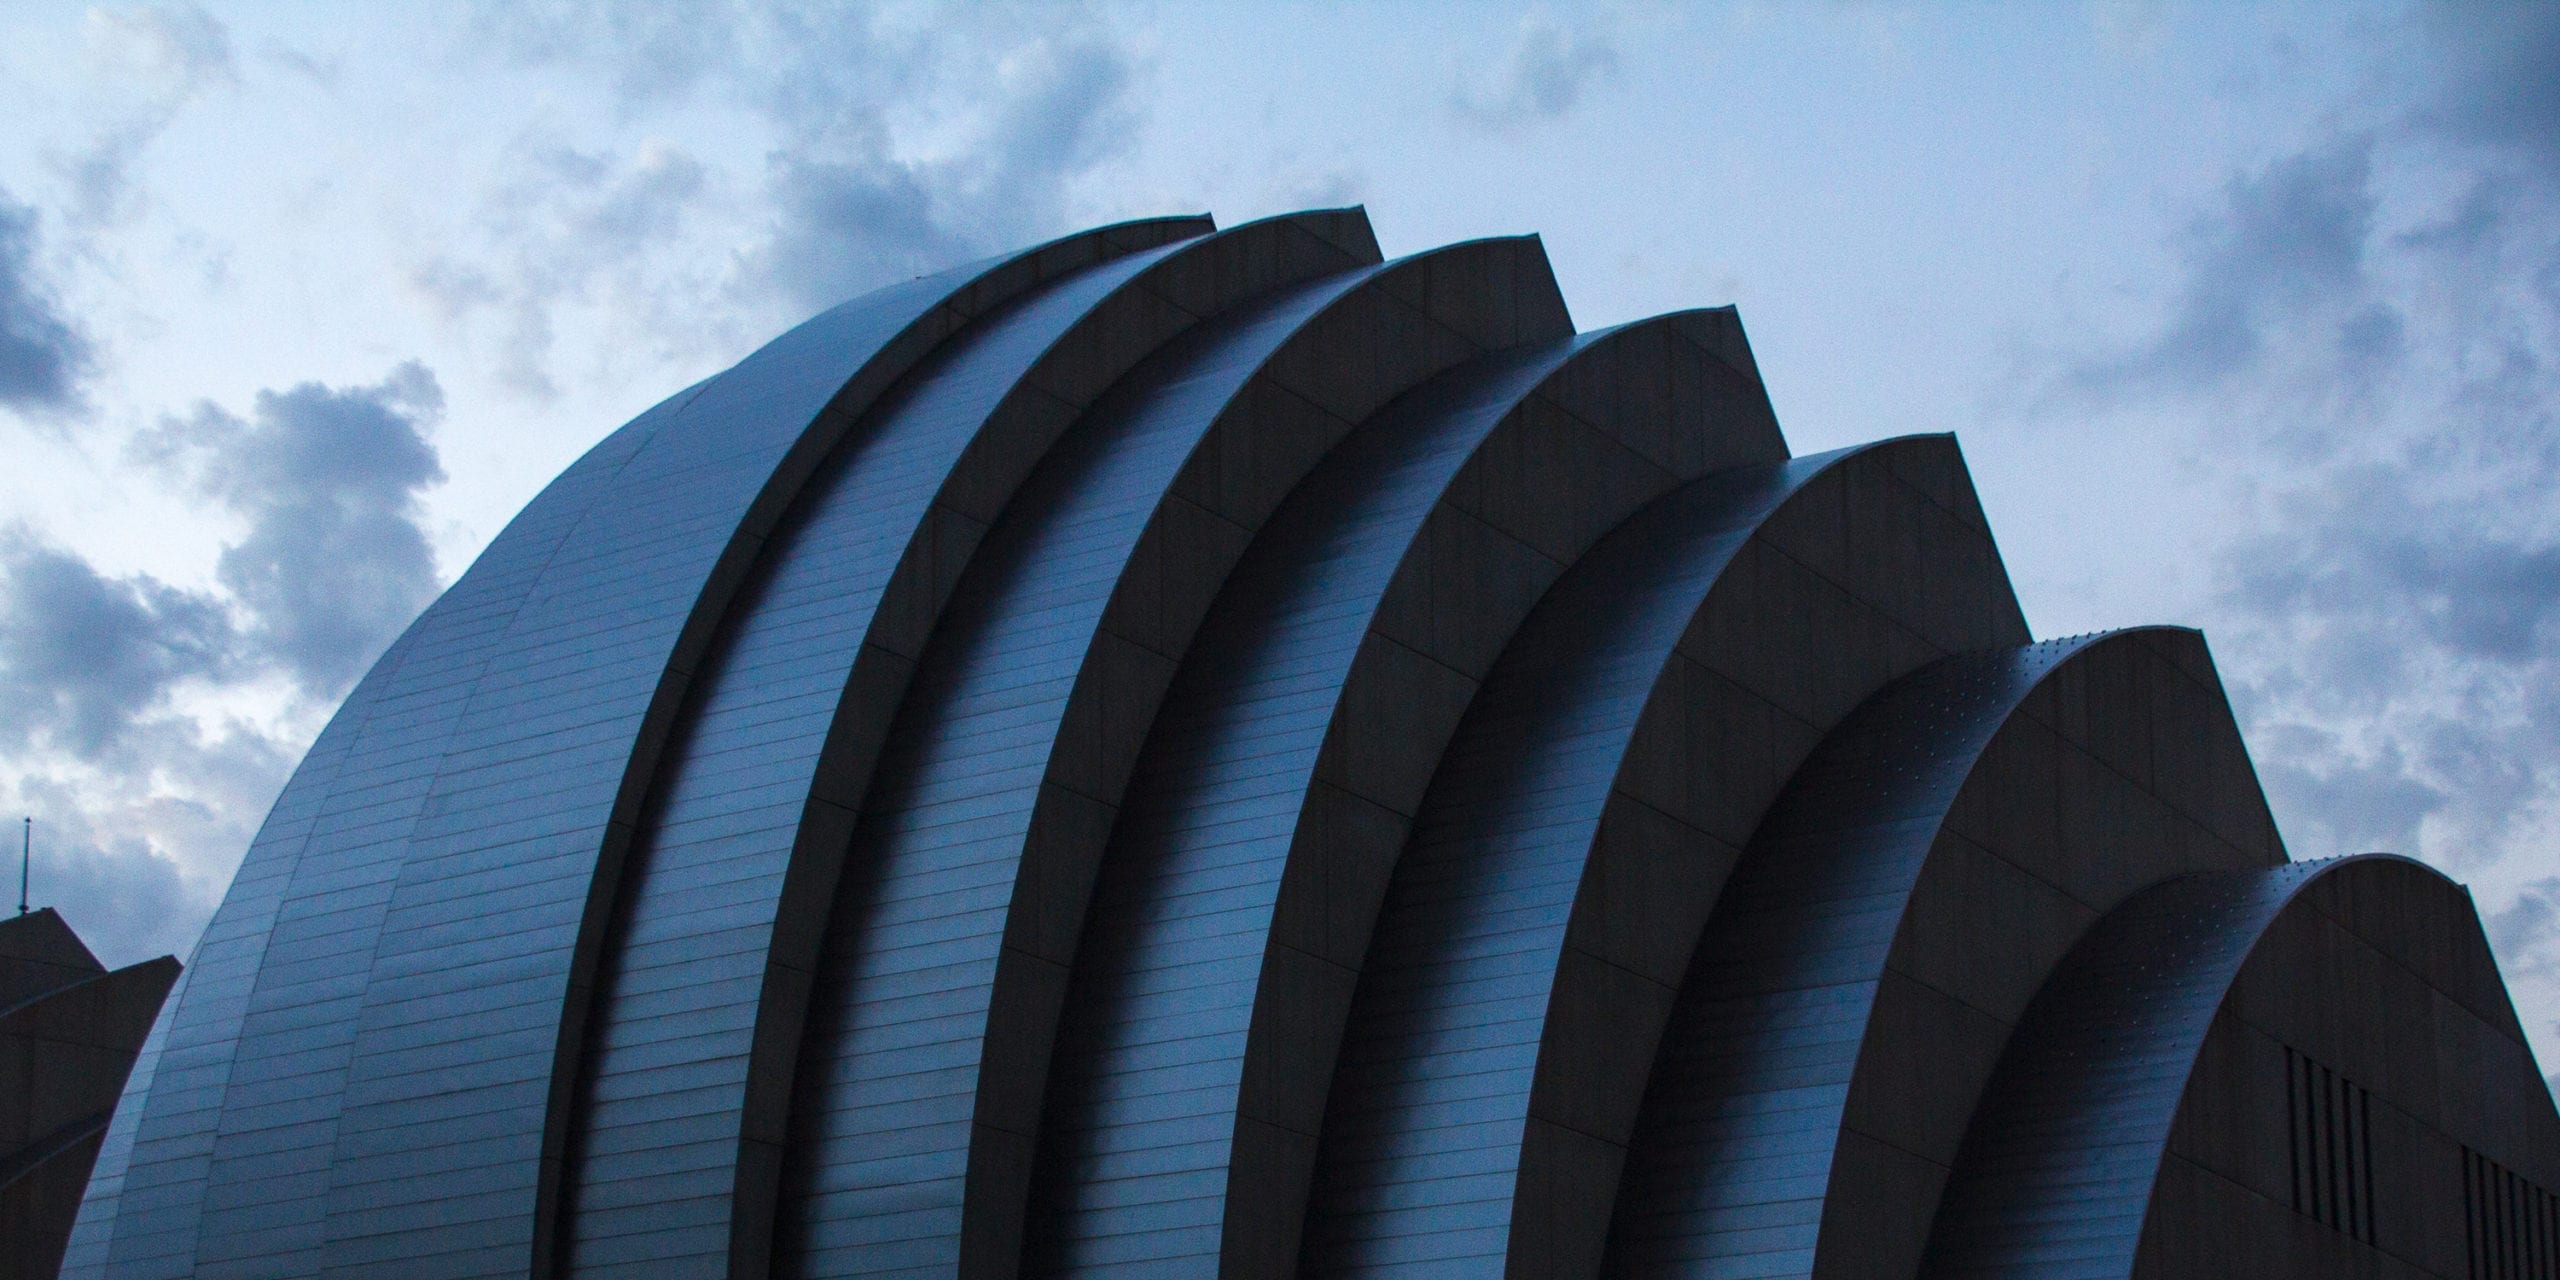 The Kaufmann Center for the Performing Arts. Photo by Flickr user Anthony (26424952@N00).